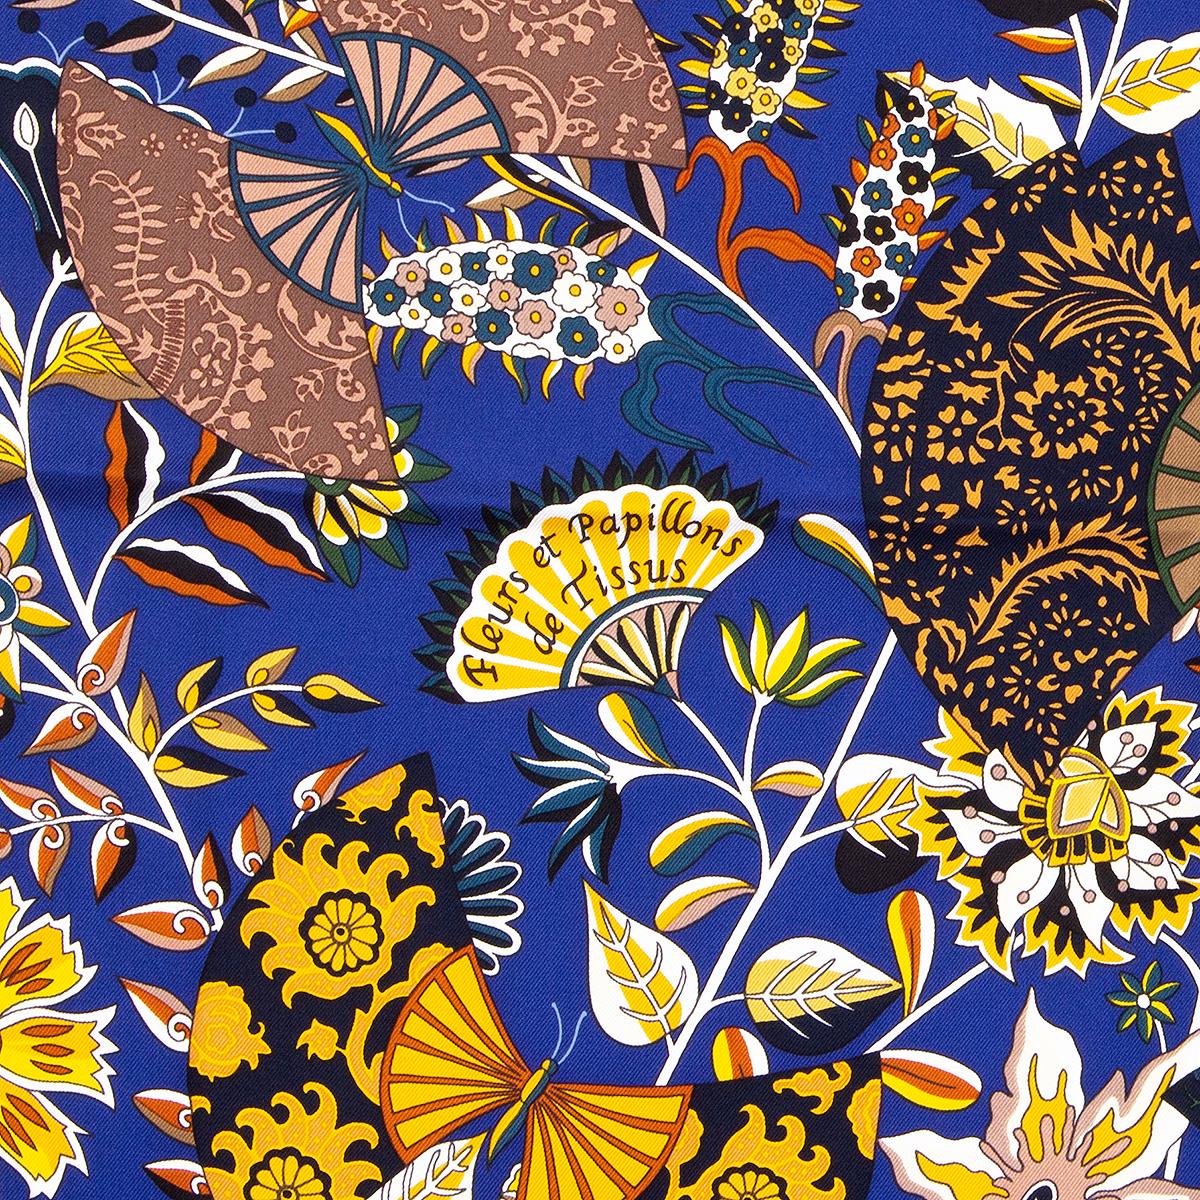 Hermes 'Fleurs et Papillon de Tissus 90' scarf by Christine Henry in dark blue silk twill (100%) with contrast white hem and details in various shades of yellow and brown. Has been worn and is in excellent condition.

Width 90cm (35.1in)
Height 90cm